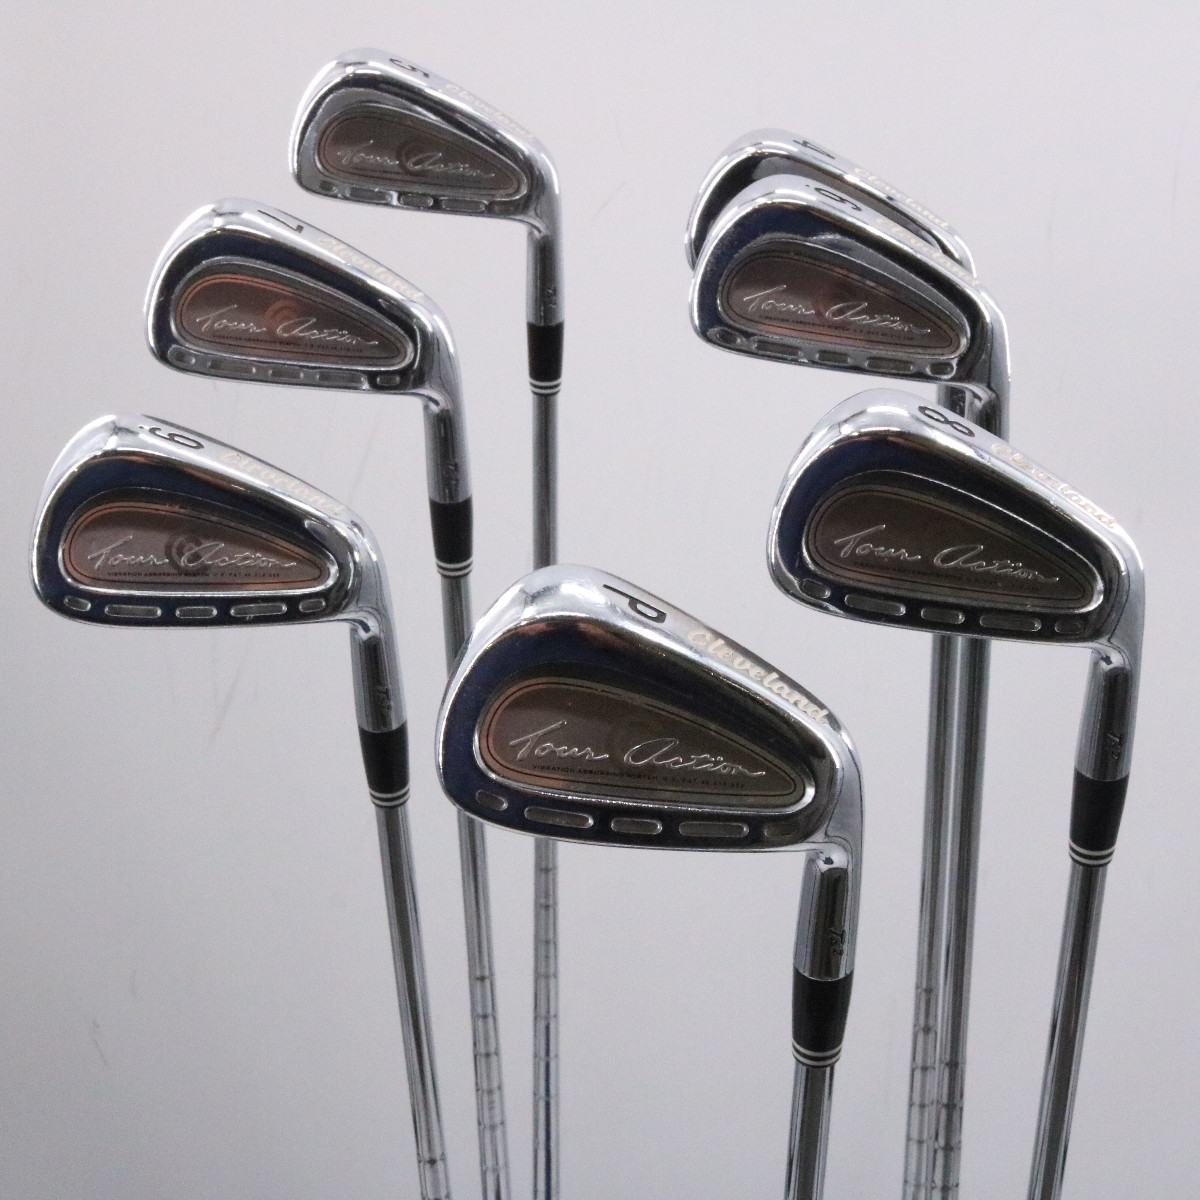 cleveland tour action irons release date